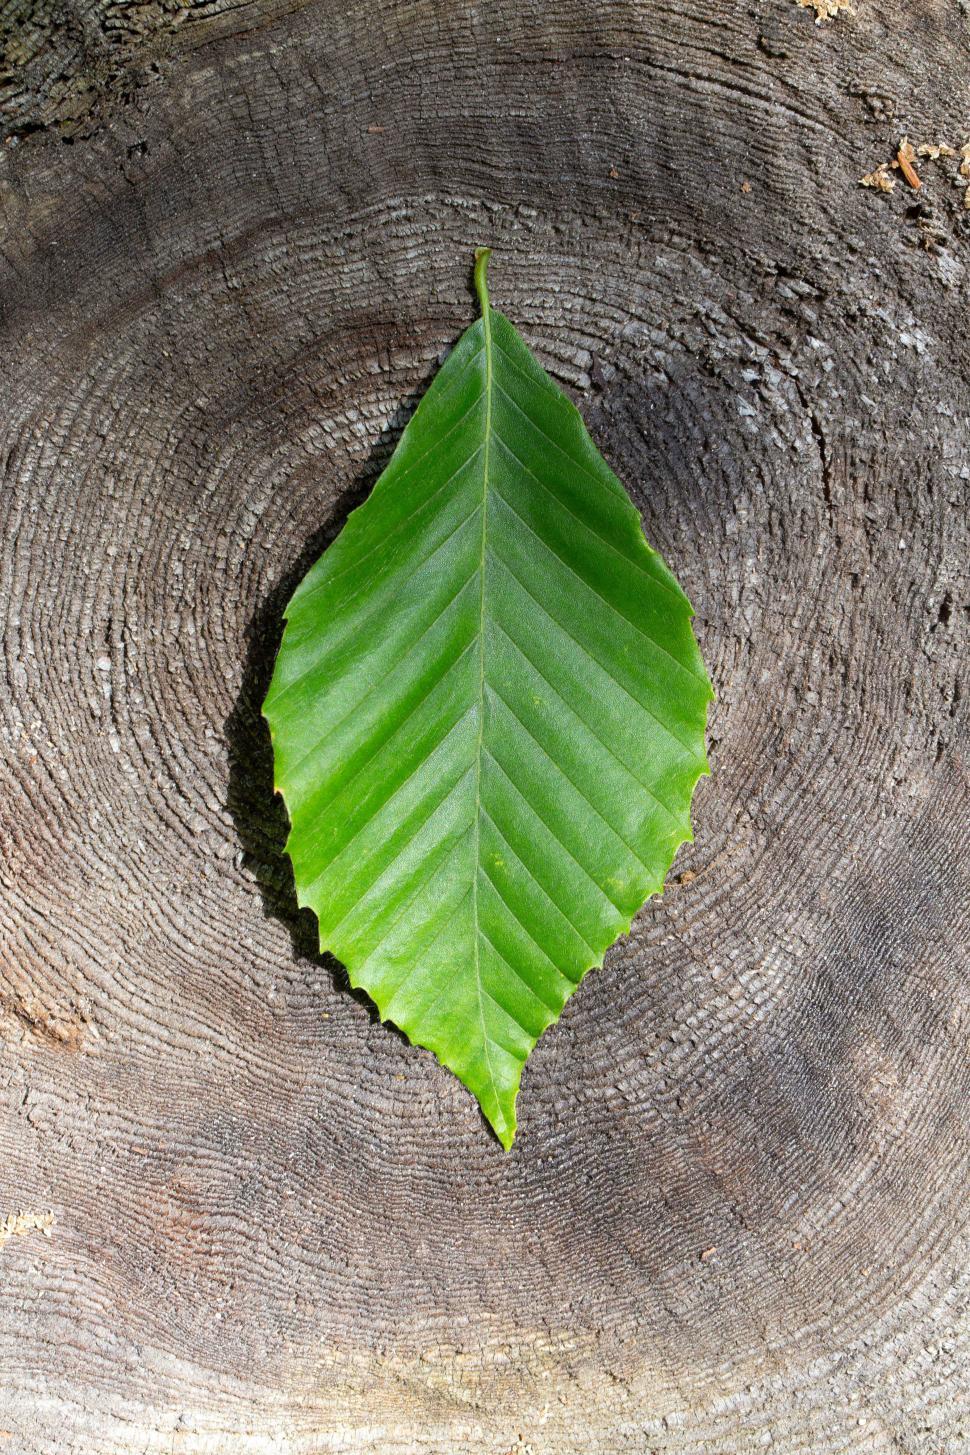 Free Image of A green leaf on a tree stump 